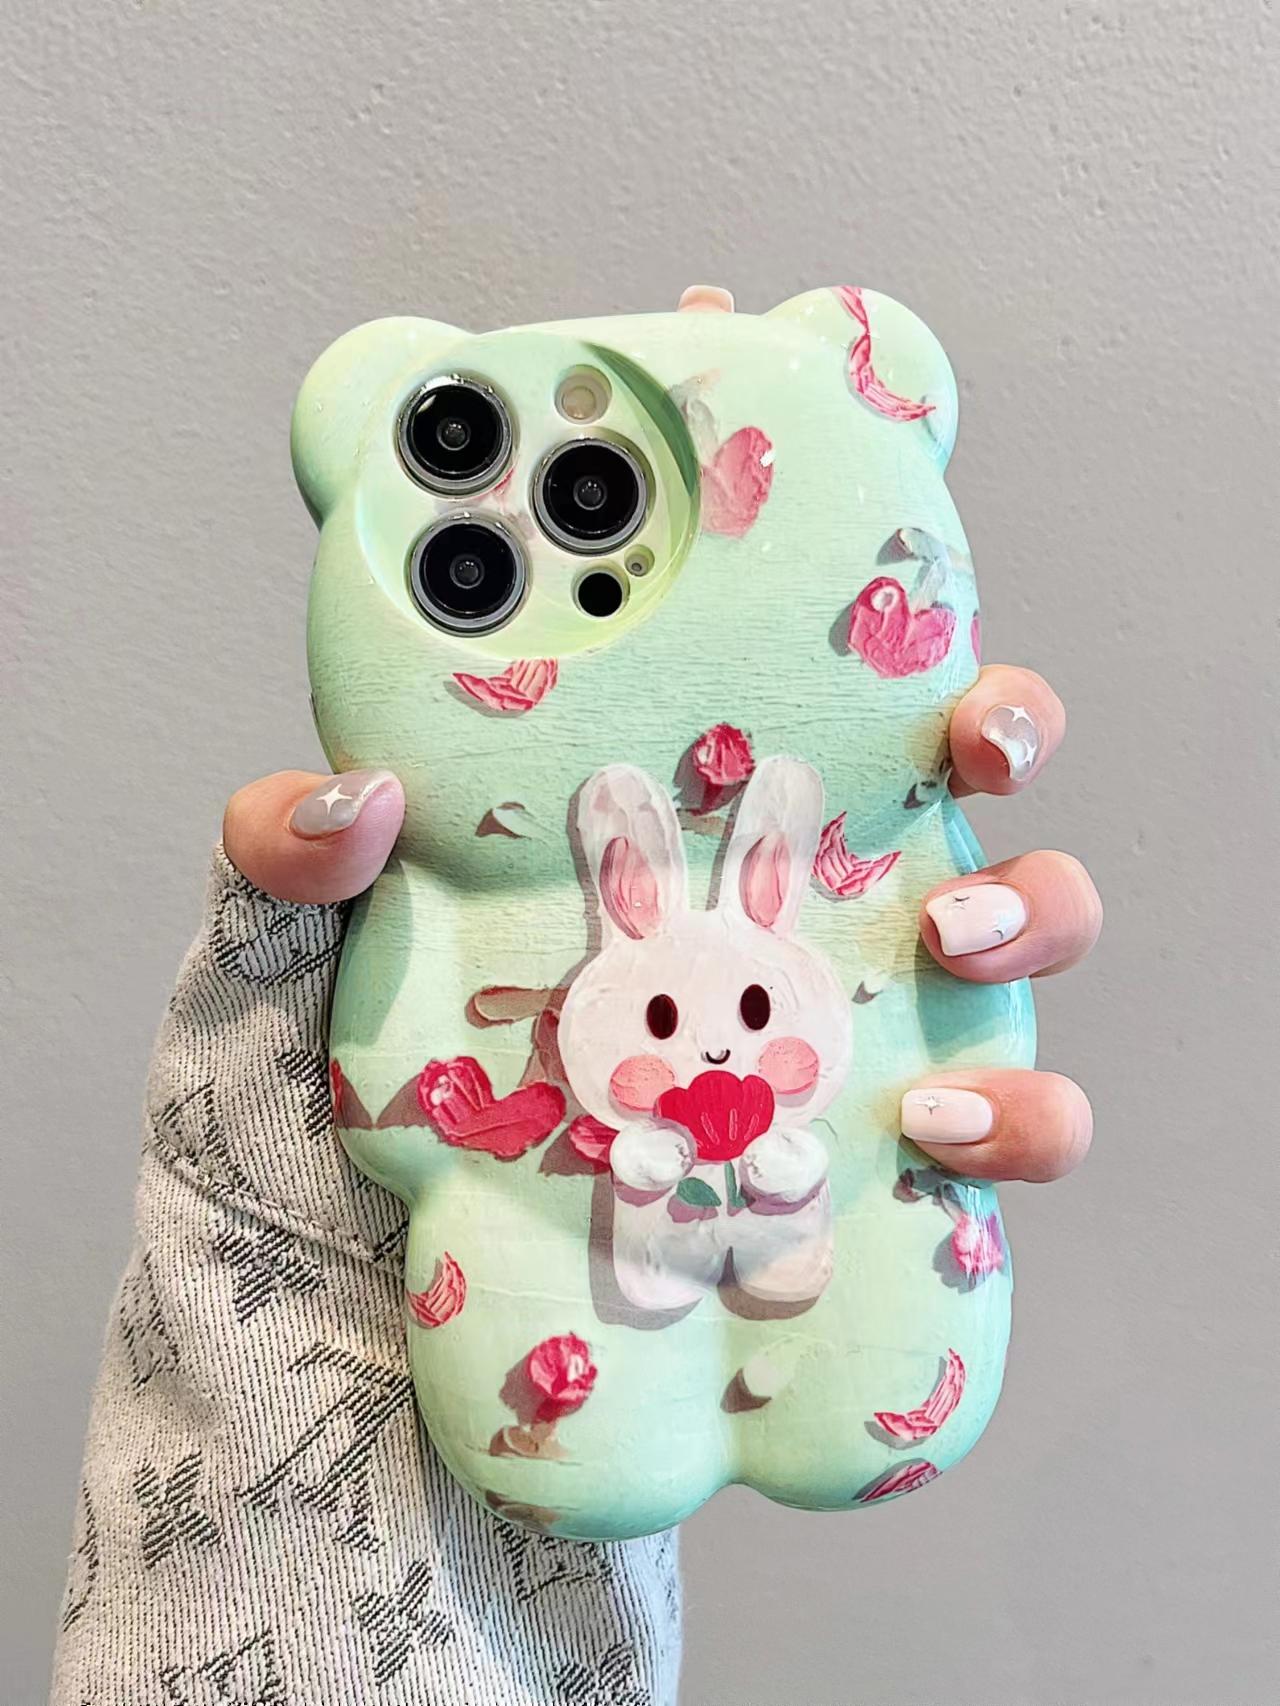 Bear shaped cute case for iPhone X-14PM.